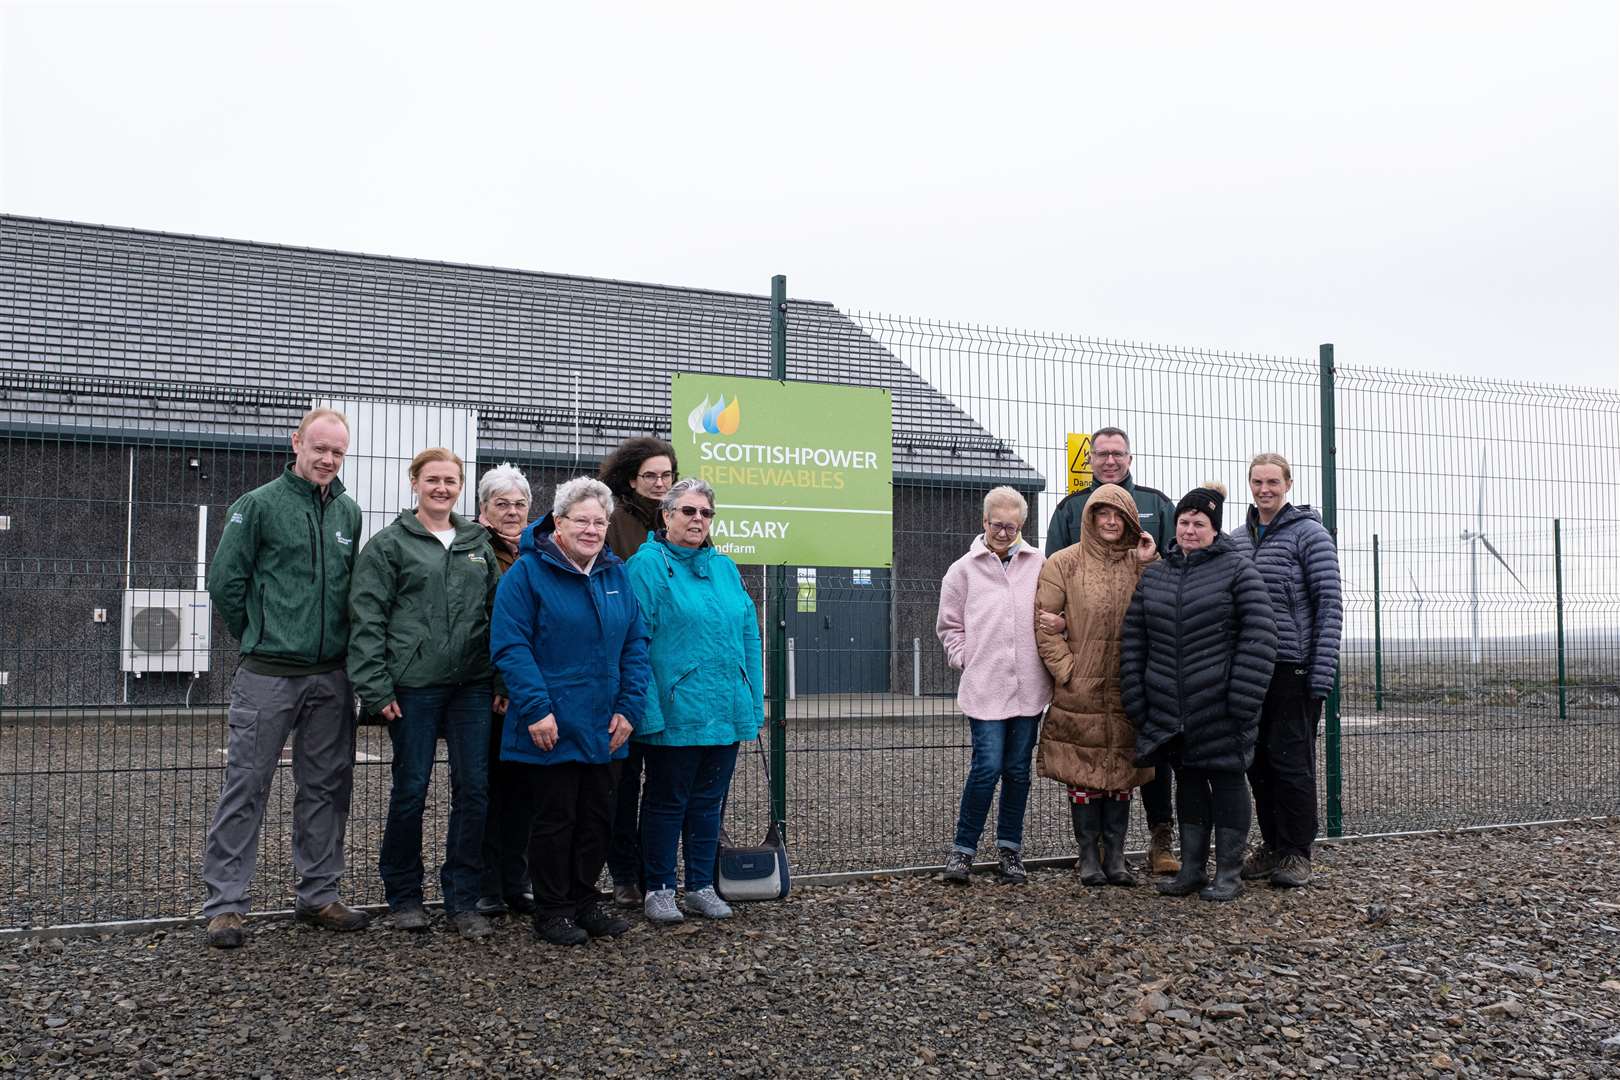 Caithness community representatives at Halsary with ScottishPower Renewables staff when the £3.75m community benefit fund was launched last year.